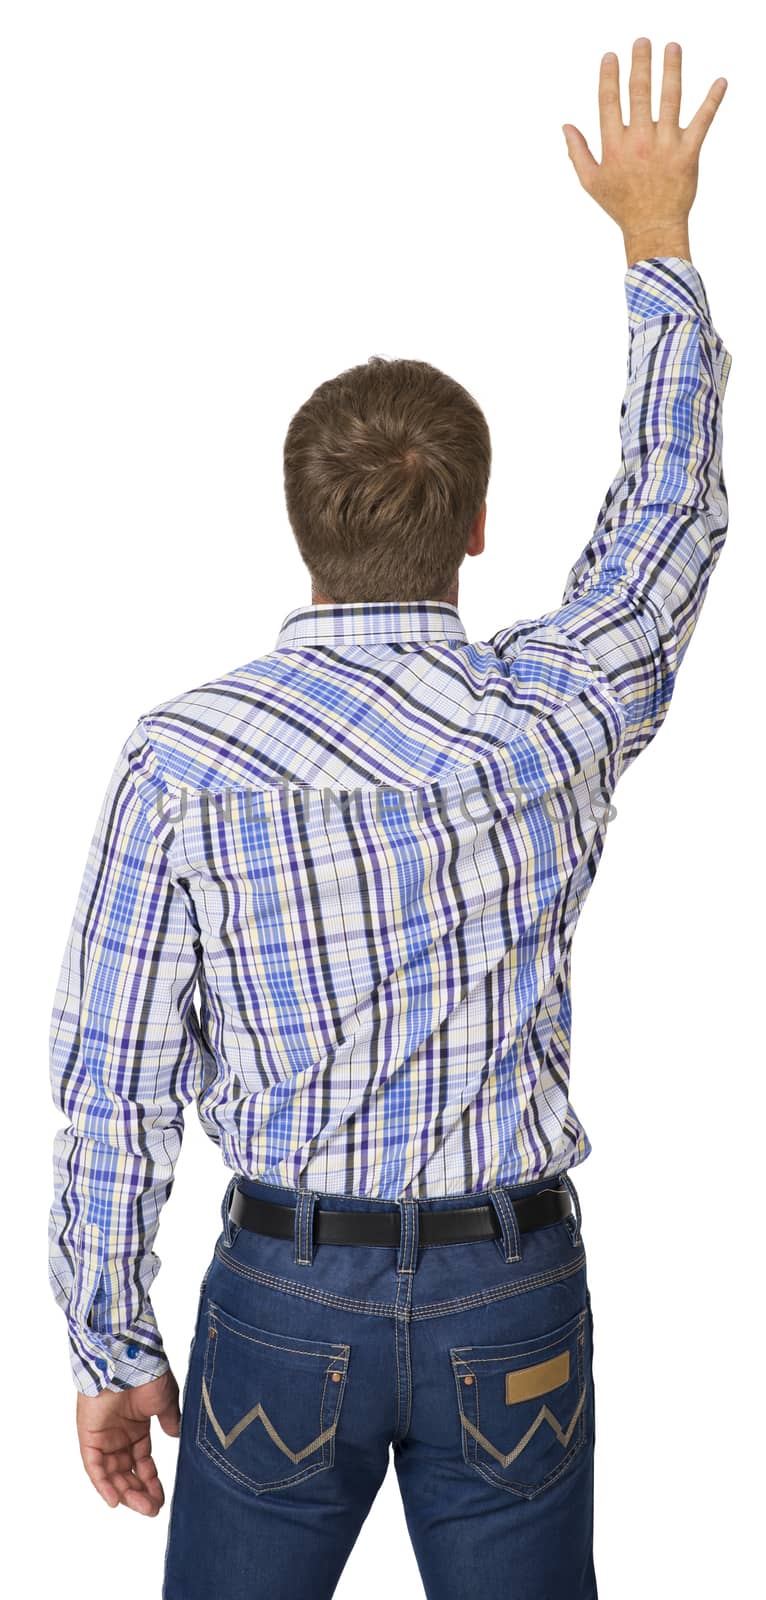 Portrait of a young man raised his hand up. Back view. White background